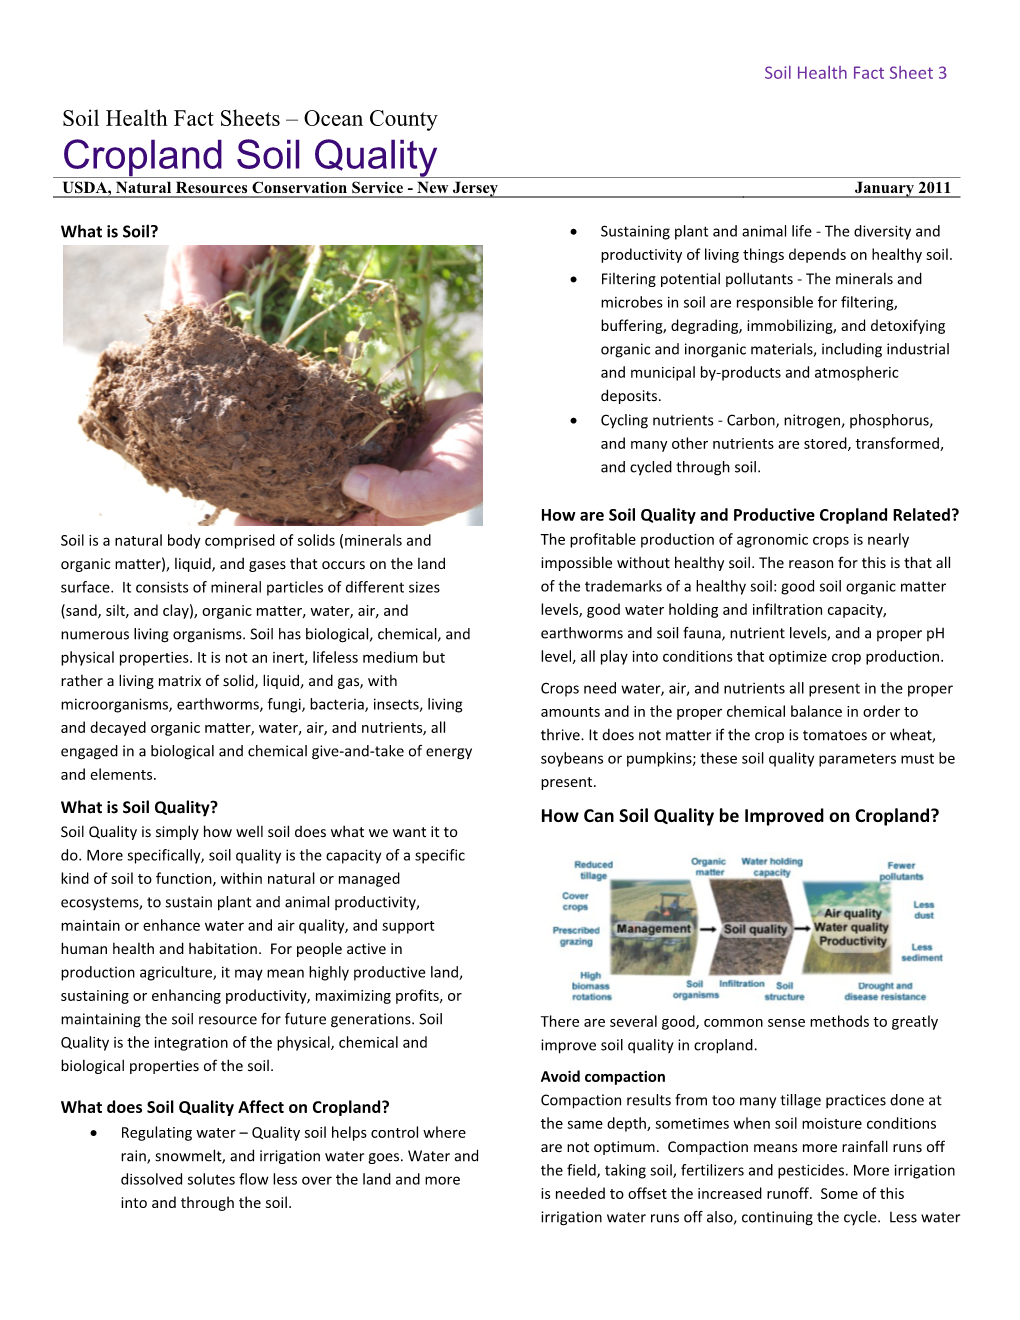 Cropland Soil Quality USDA, Natural Resources Conservation Service - New Jersey January 2011